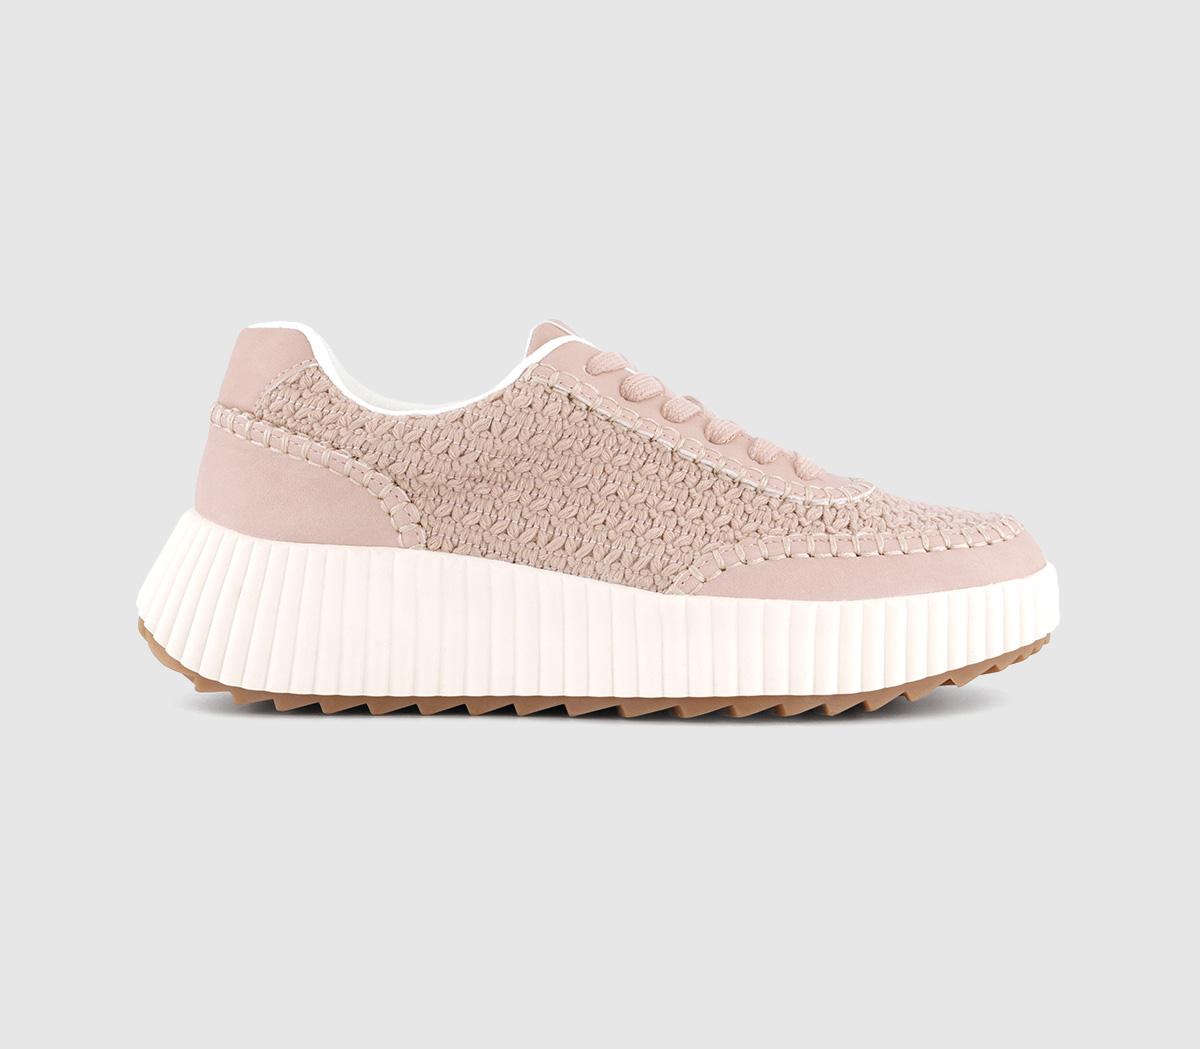 OFFICEFlo Woven Lace Up TrainersPink Mix